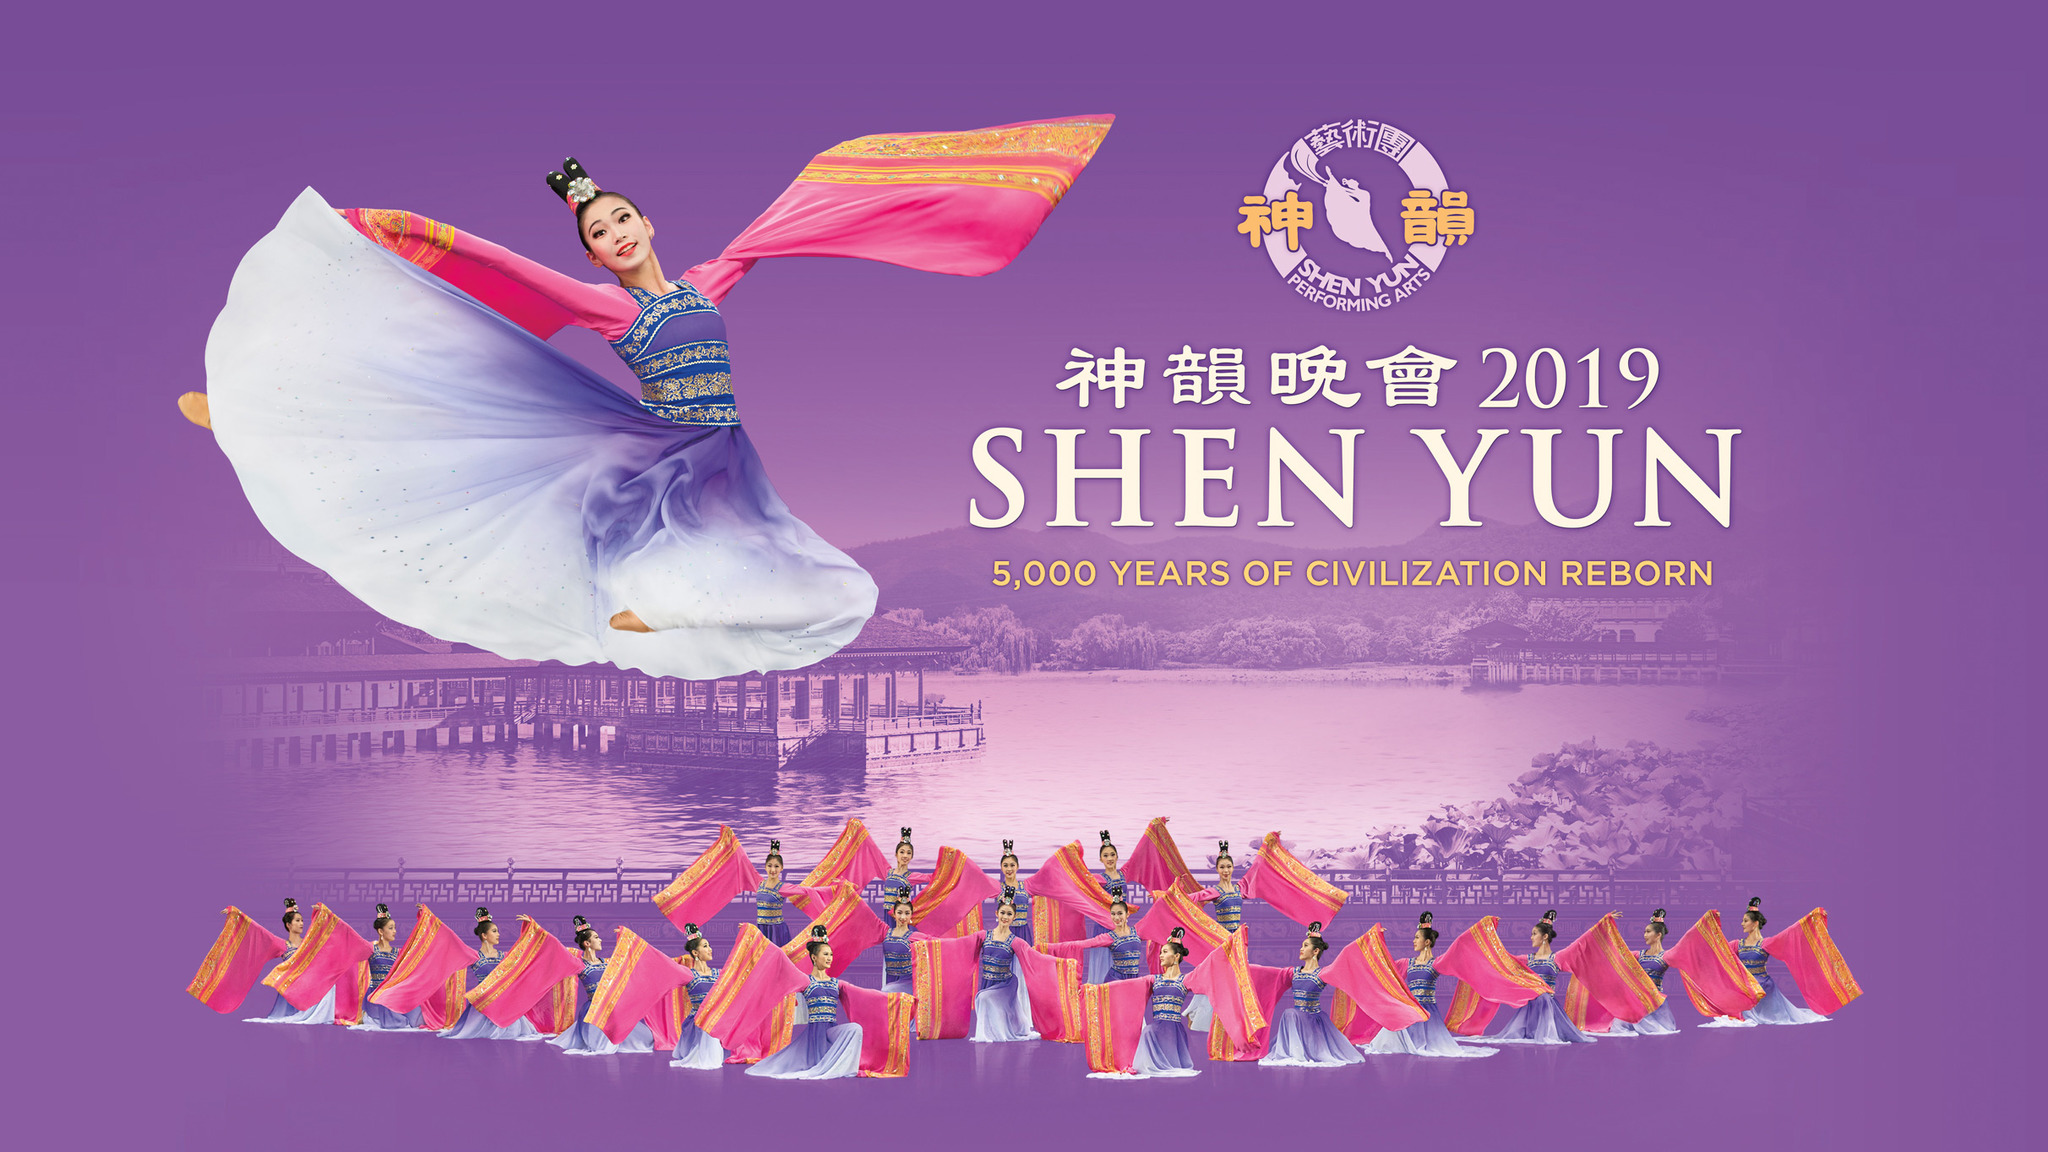 Shen Yun invites you to travel back to the magical world of ancient China. 